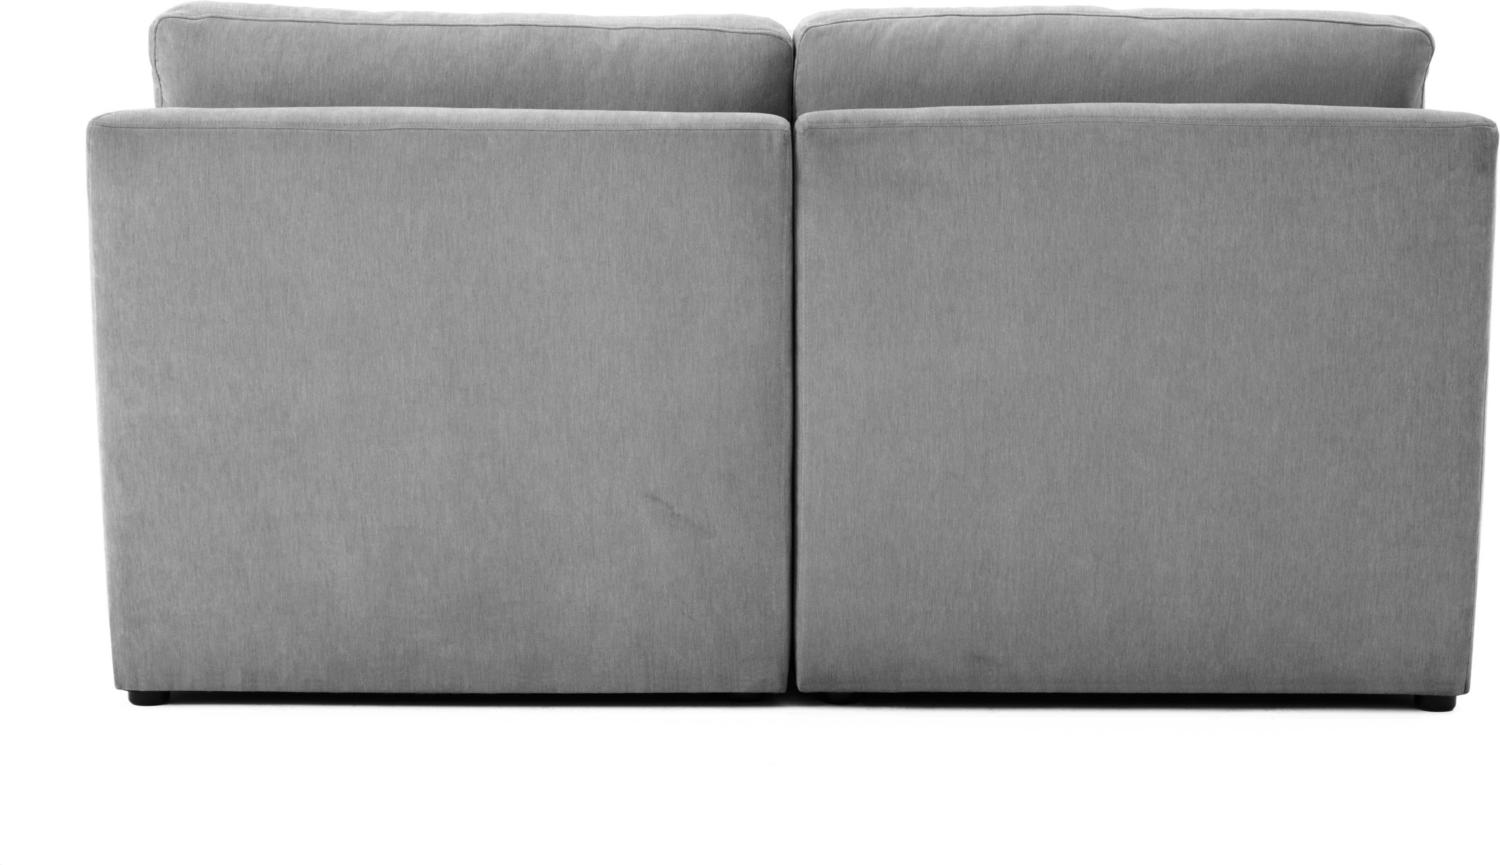 sectional sleeper sofa with chaise and storage Tov Furniture Loveseats Grey